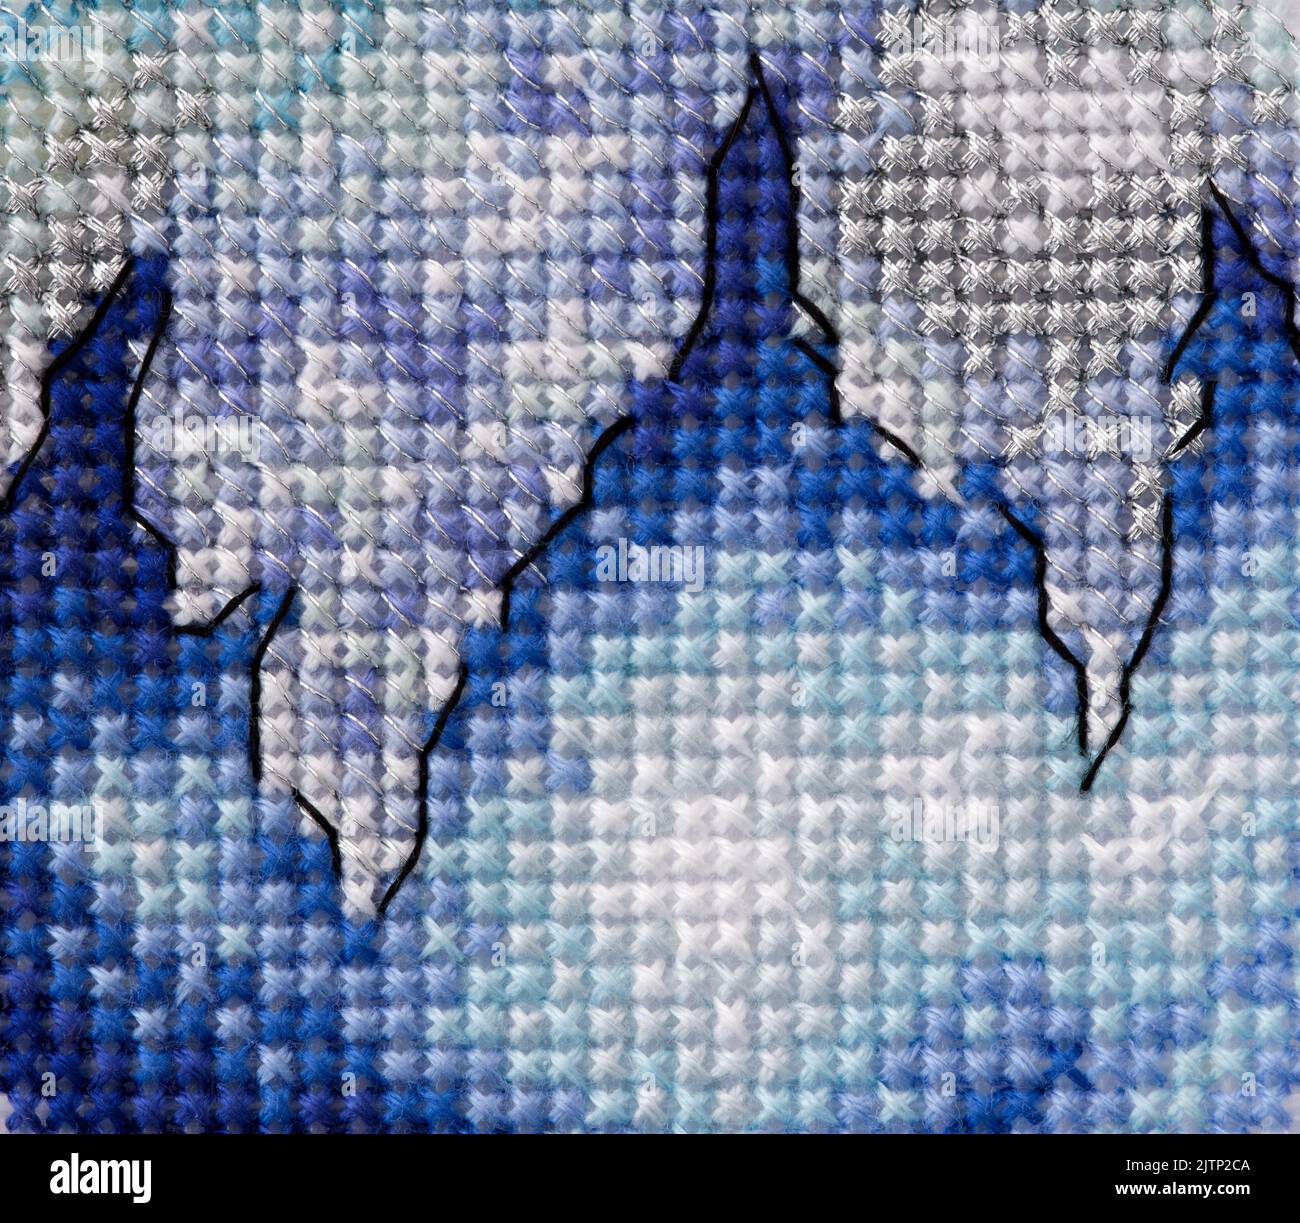 Blue, white and silver cross stitch background. Close-up Stock Photo